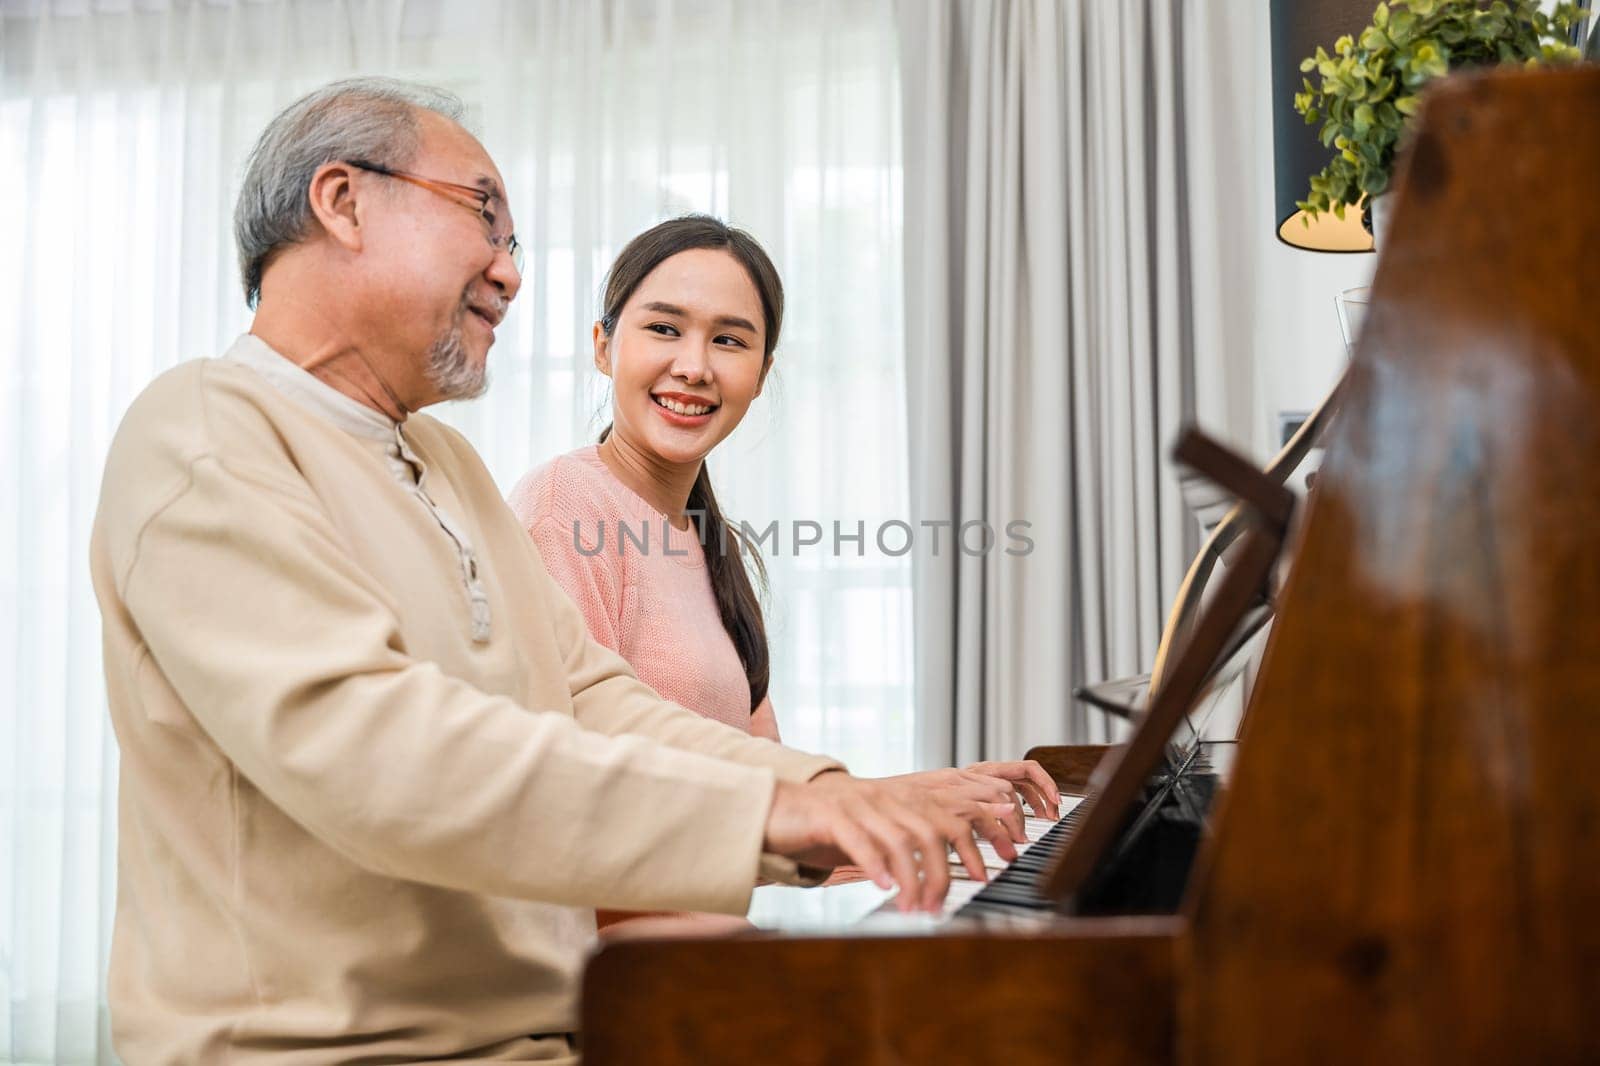 Family. Young woman teaching piano for senior man teaching, happy daughter and elderly father with eyeglasses relaxation playing piano together in living room at home, lifestyle life after retirement